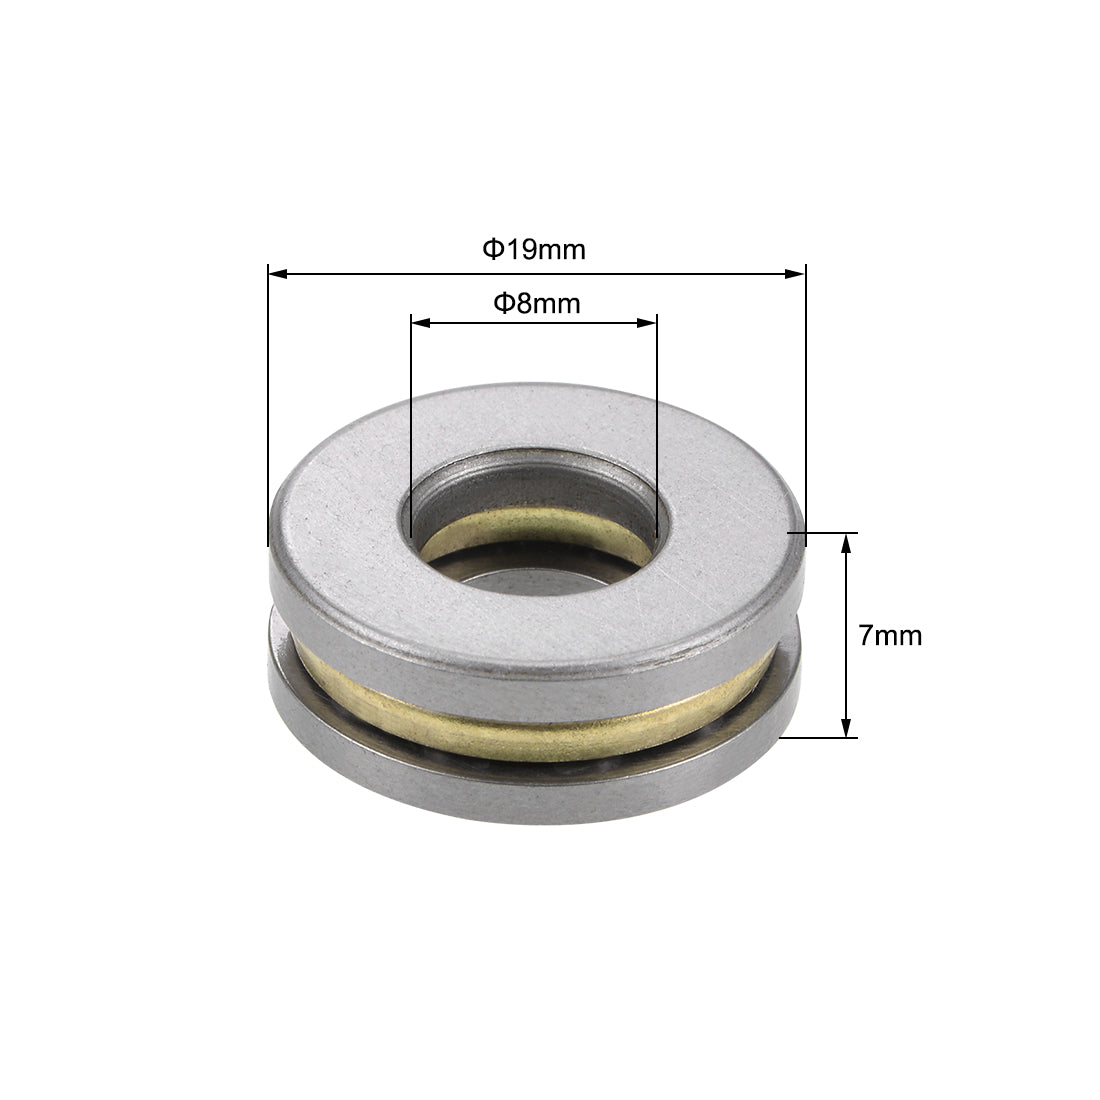 uxcell Uxcell F8-19M Miniature Thrust Ball Bearing 8x19x7mm Chrome Steel with Washer 10Pcs